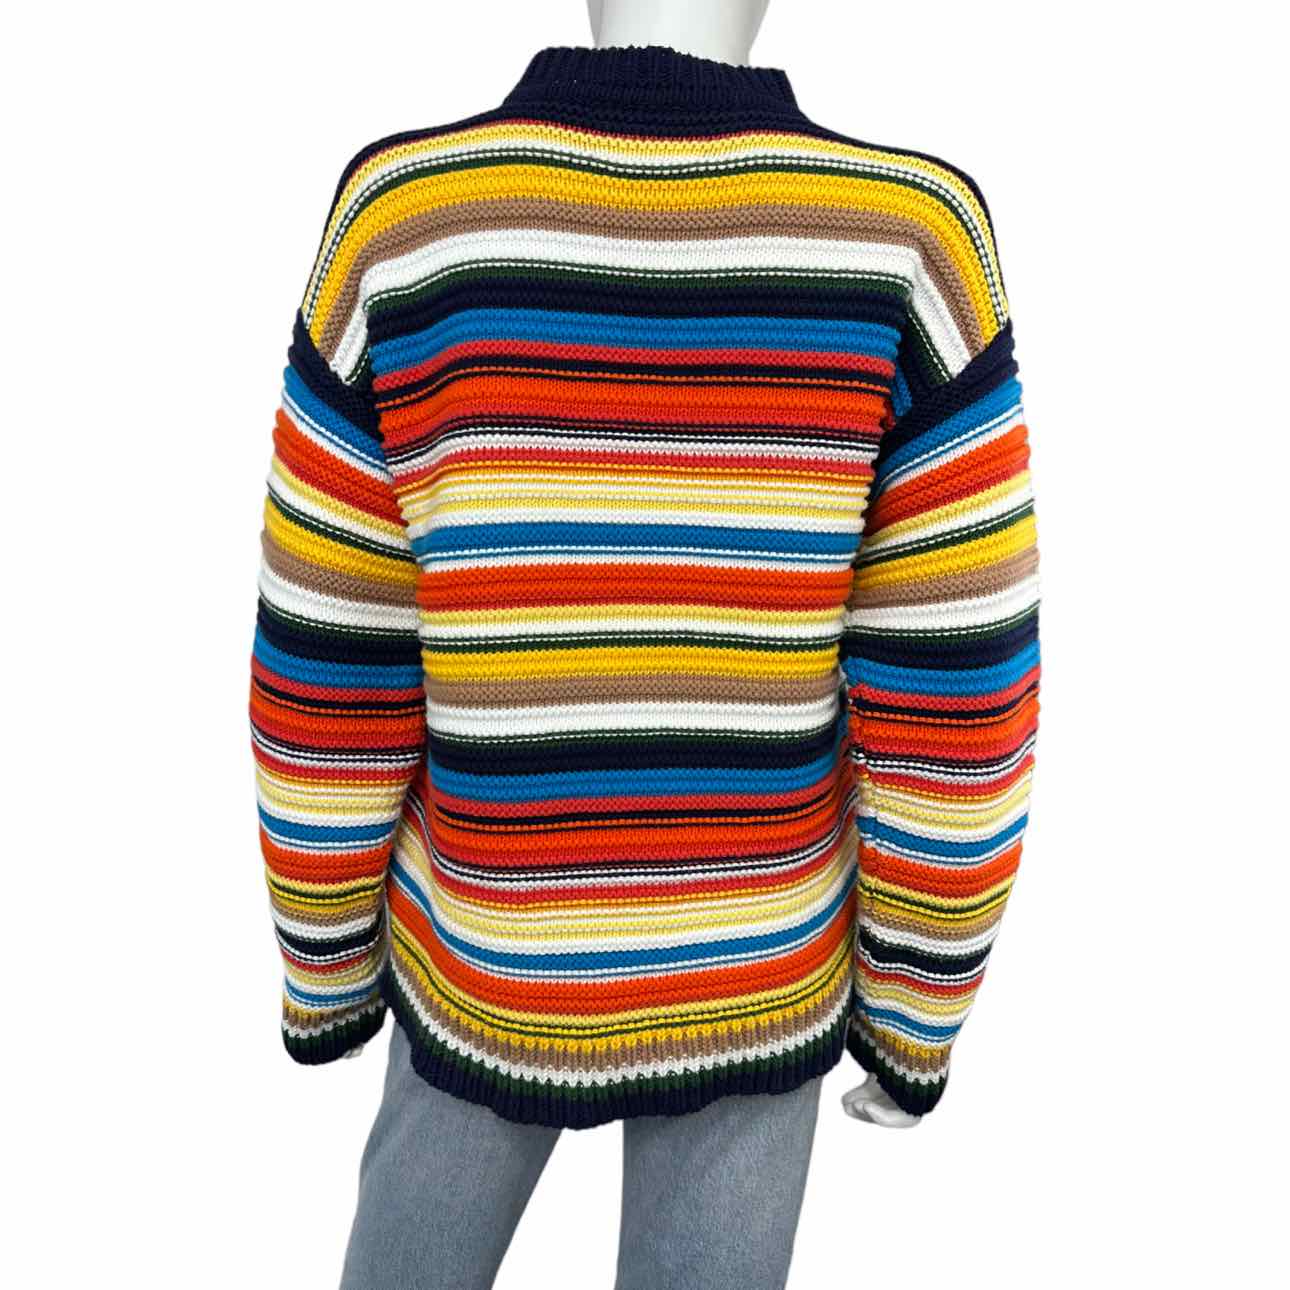 VVB VICTORIA BECKHAM 100% Cotton Striped Sweater, cozy oversized sweater